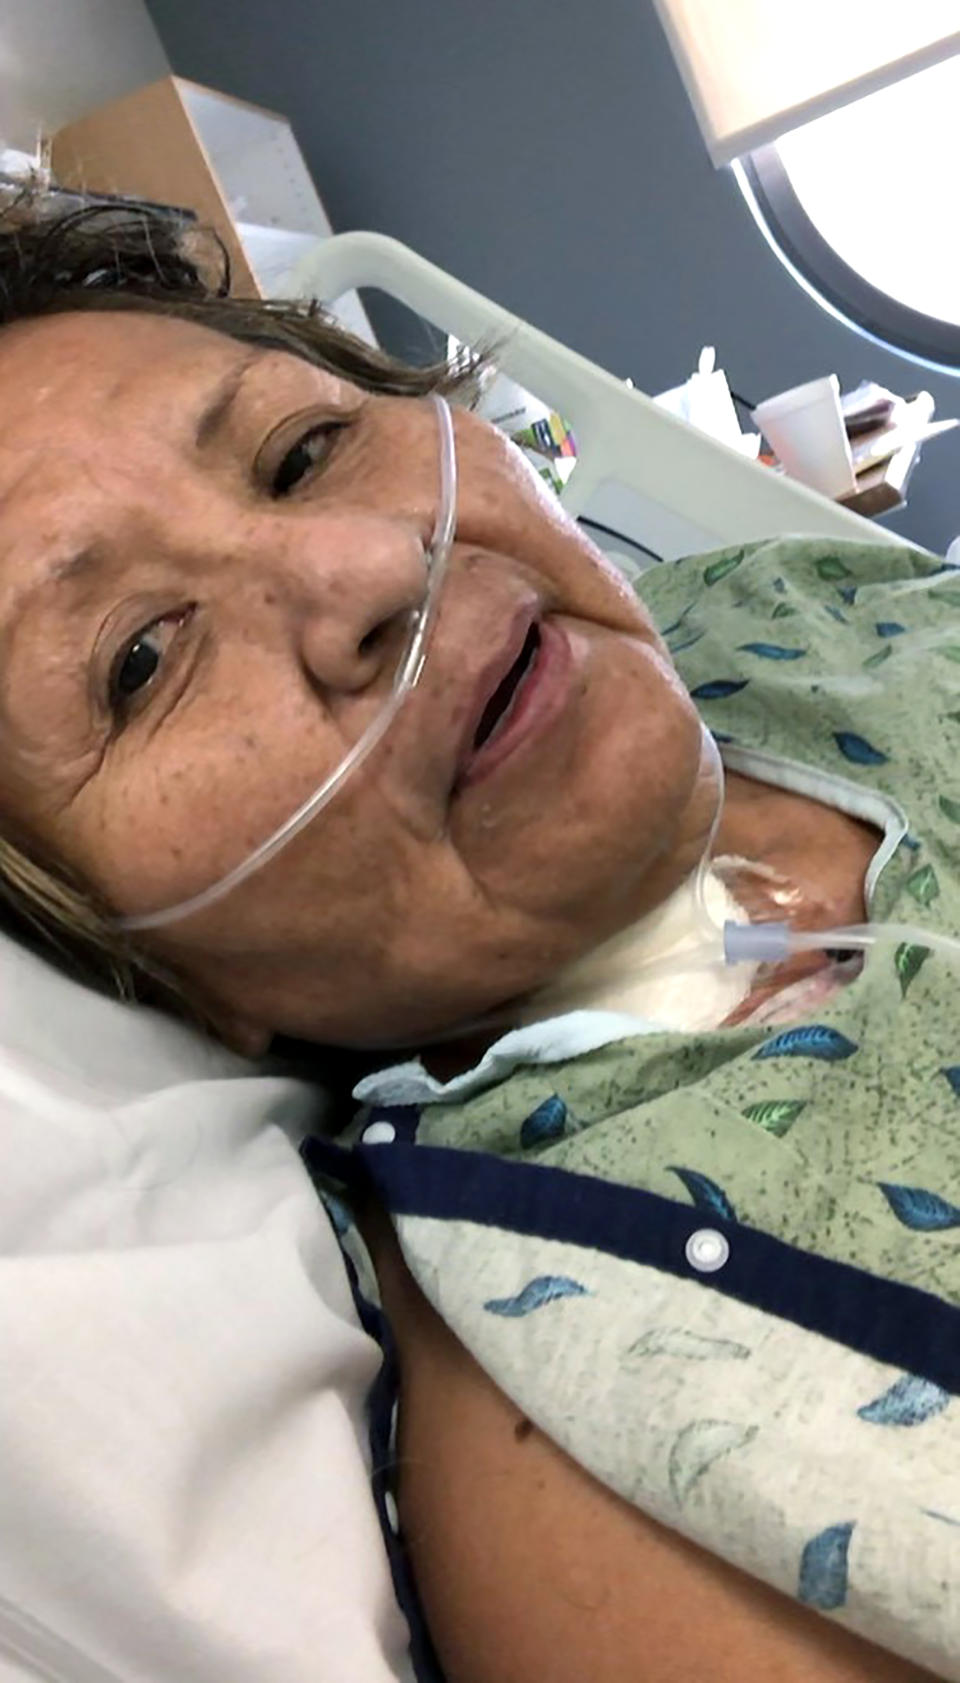 This April 17, 2020 photo provided by Shannon Todecheene shows her mother, Carol Todecheene, in a Phoenix hospital after contracting the coronavirus. Carol Todecheene was among those severely hit with the virus. (Shannon Todecheene via AP)